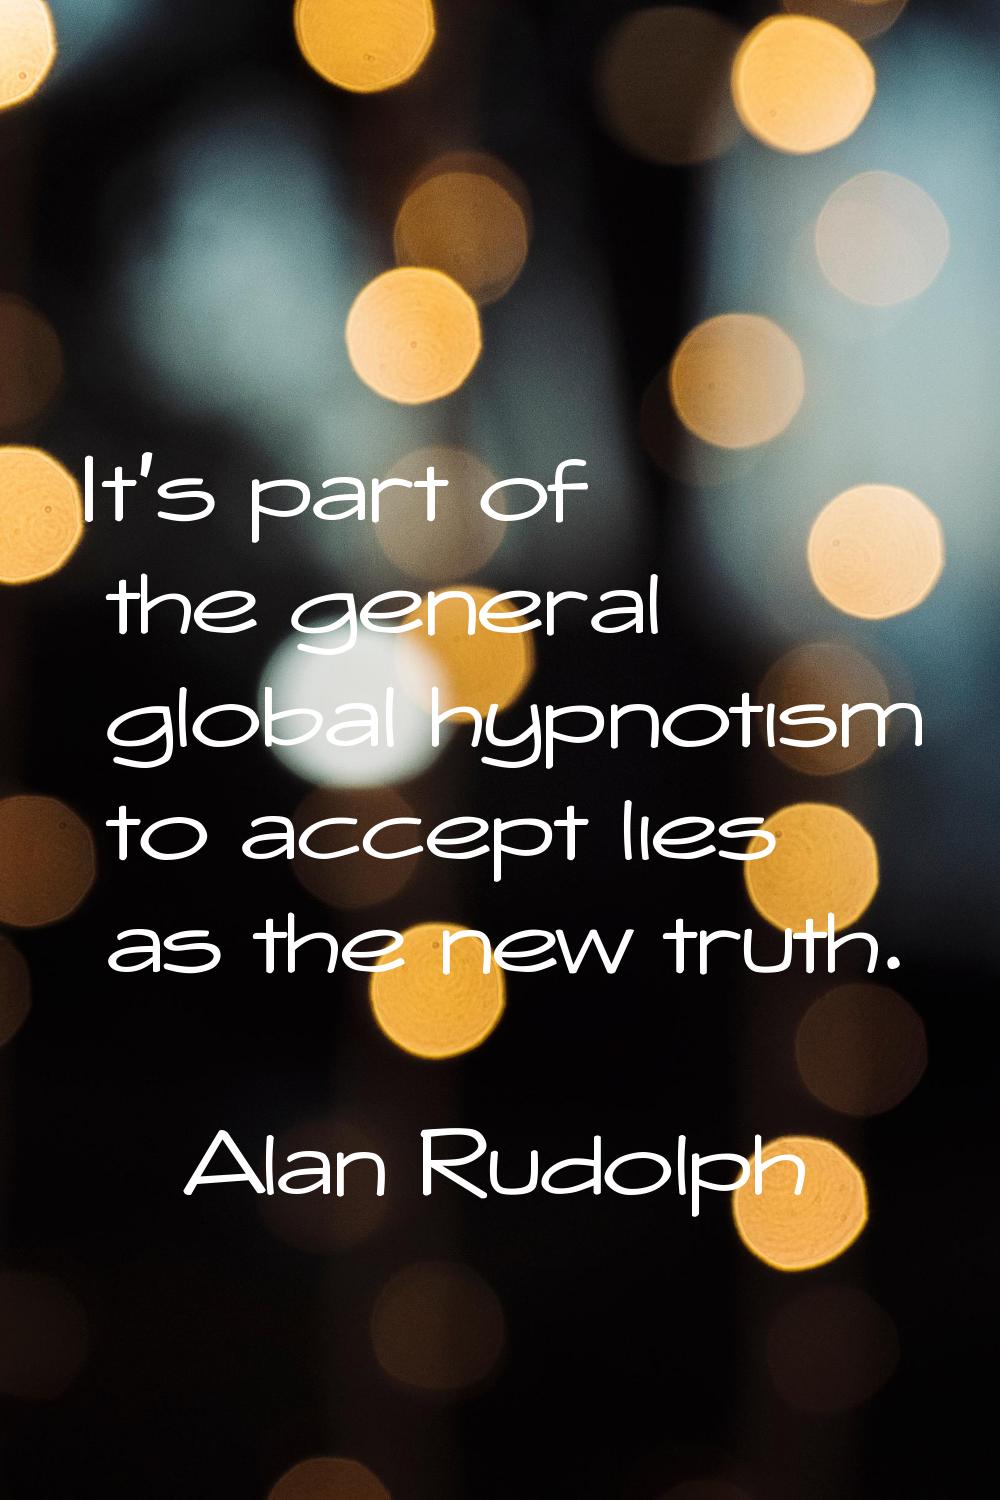 It's part of the general global hypnotism to accept lies as the new truth.